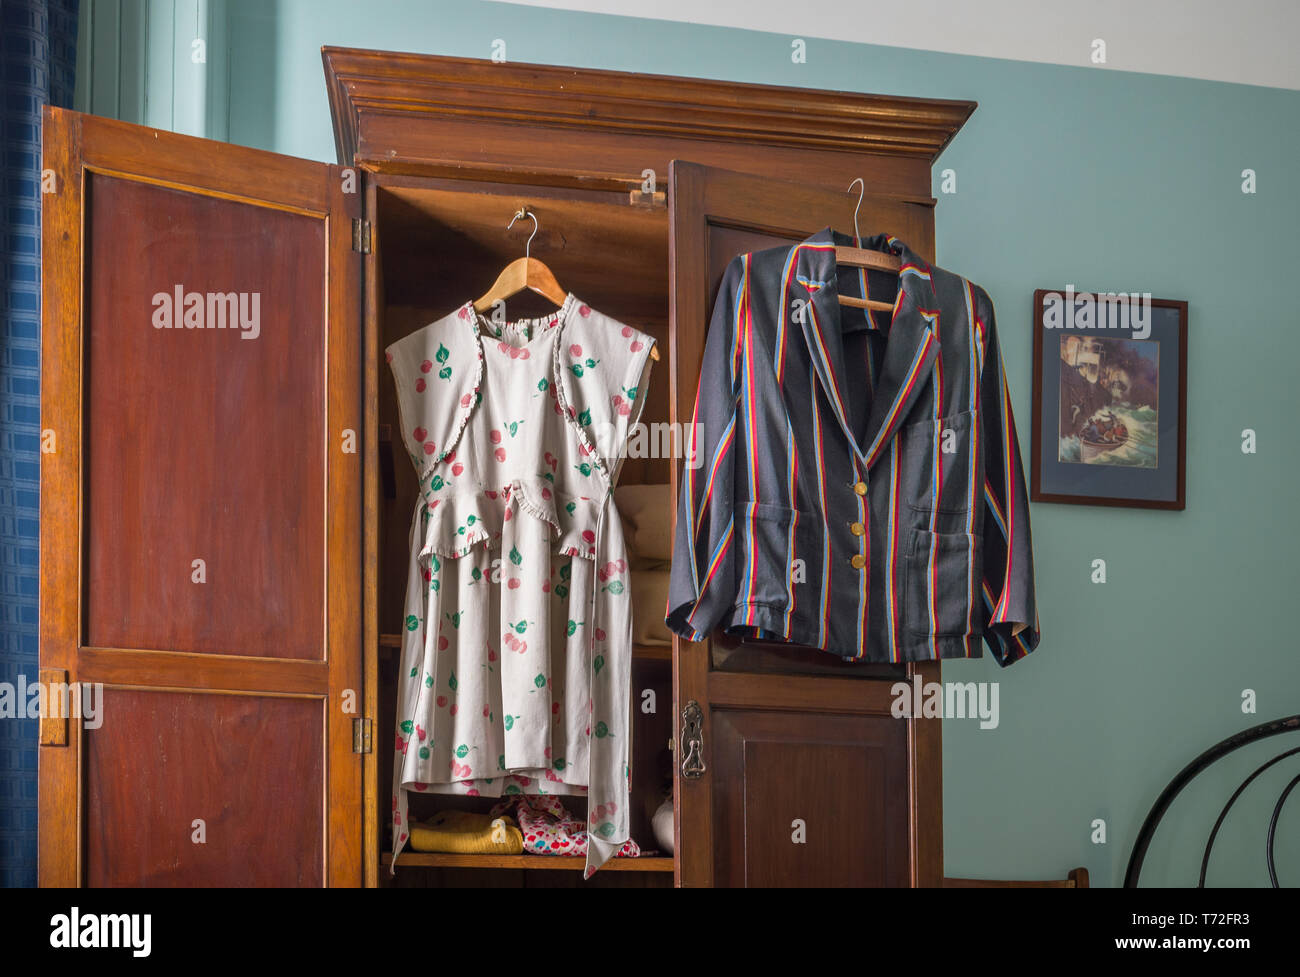 Typical bedroom from the 1940s and 1950s period with open wardrobe displaying a jacket and dress. Stock Photo